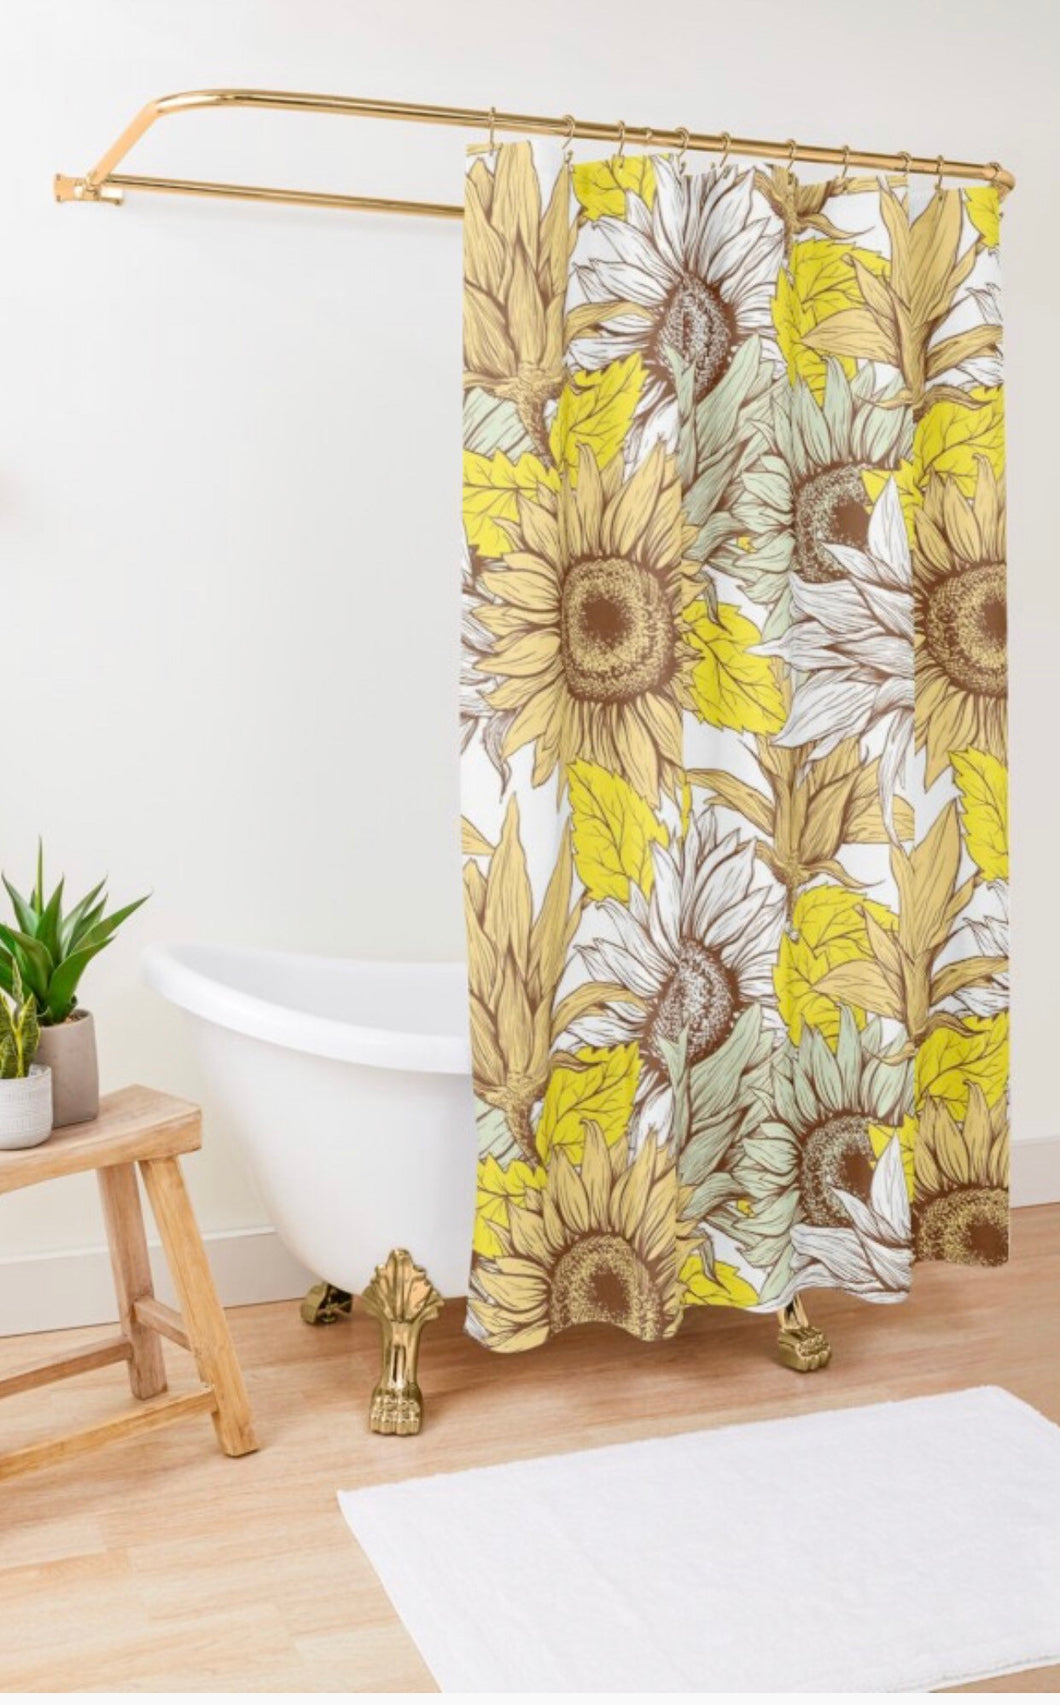 Polyester Sunflower Shower Curtain, Sunflower Floral Print, Sunflower Bath Decor, Yellow, White, Brown and Mint, Earth Tones